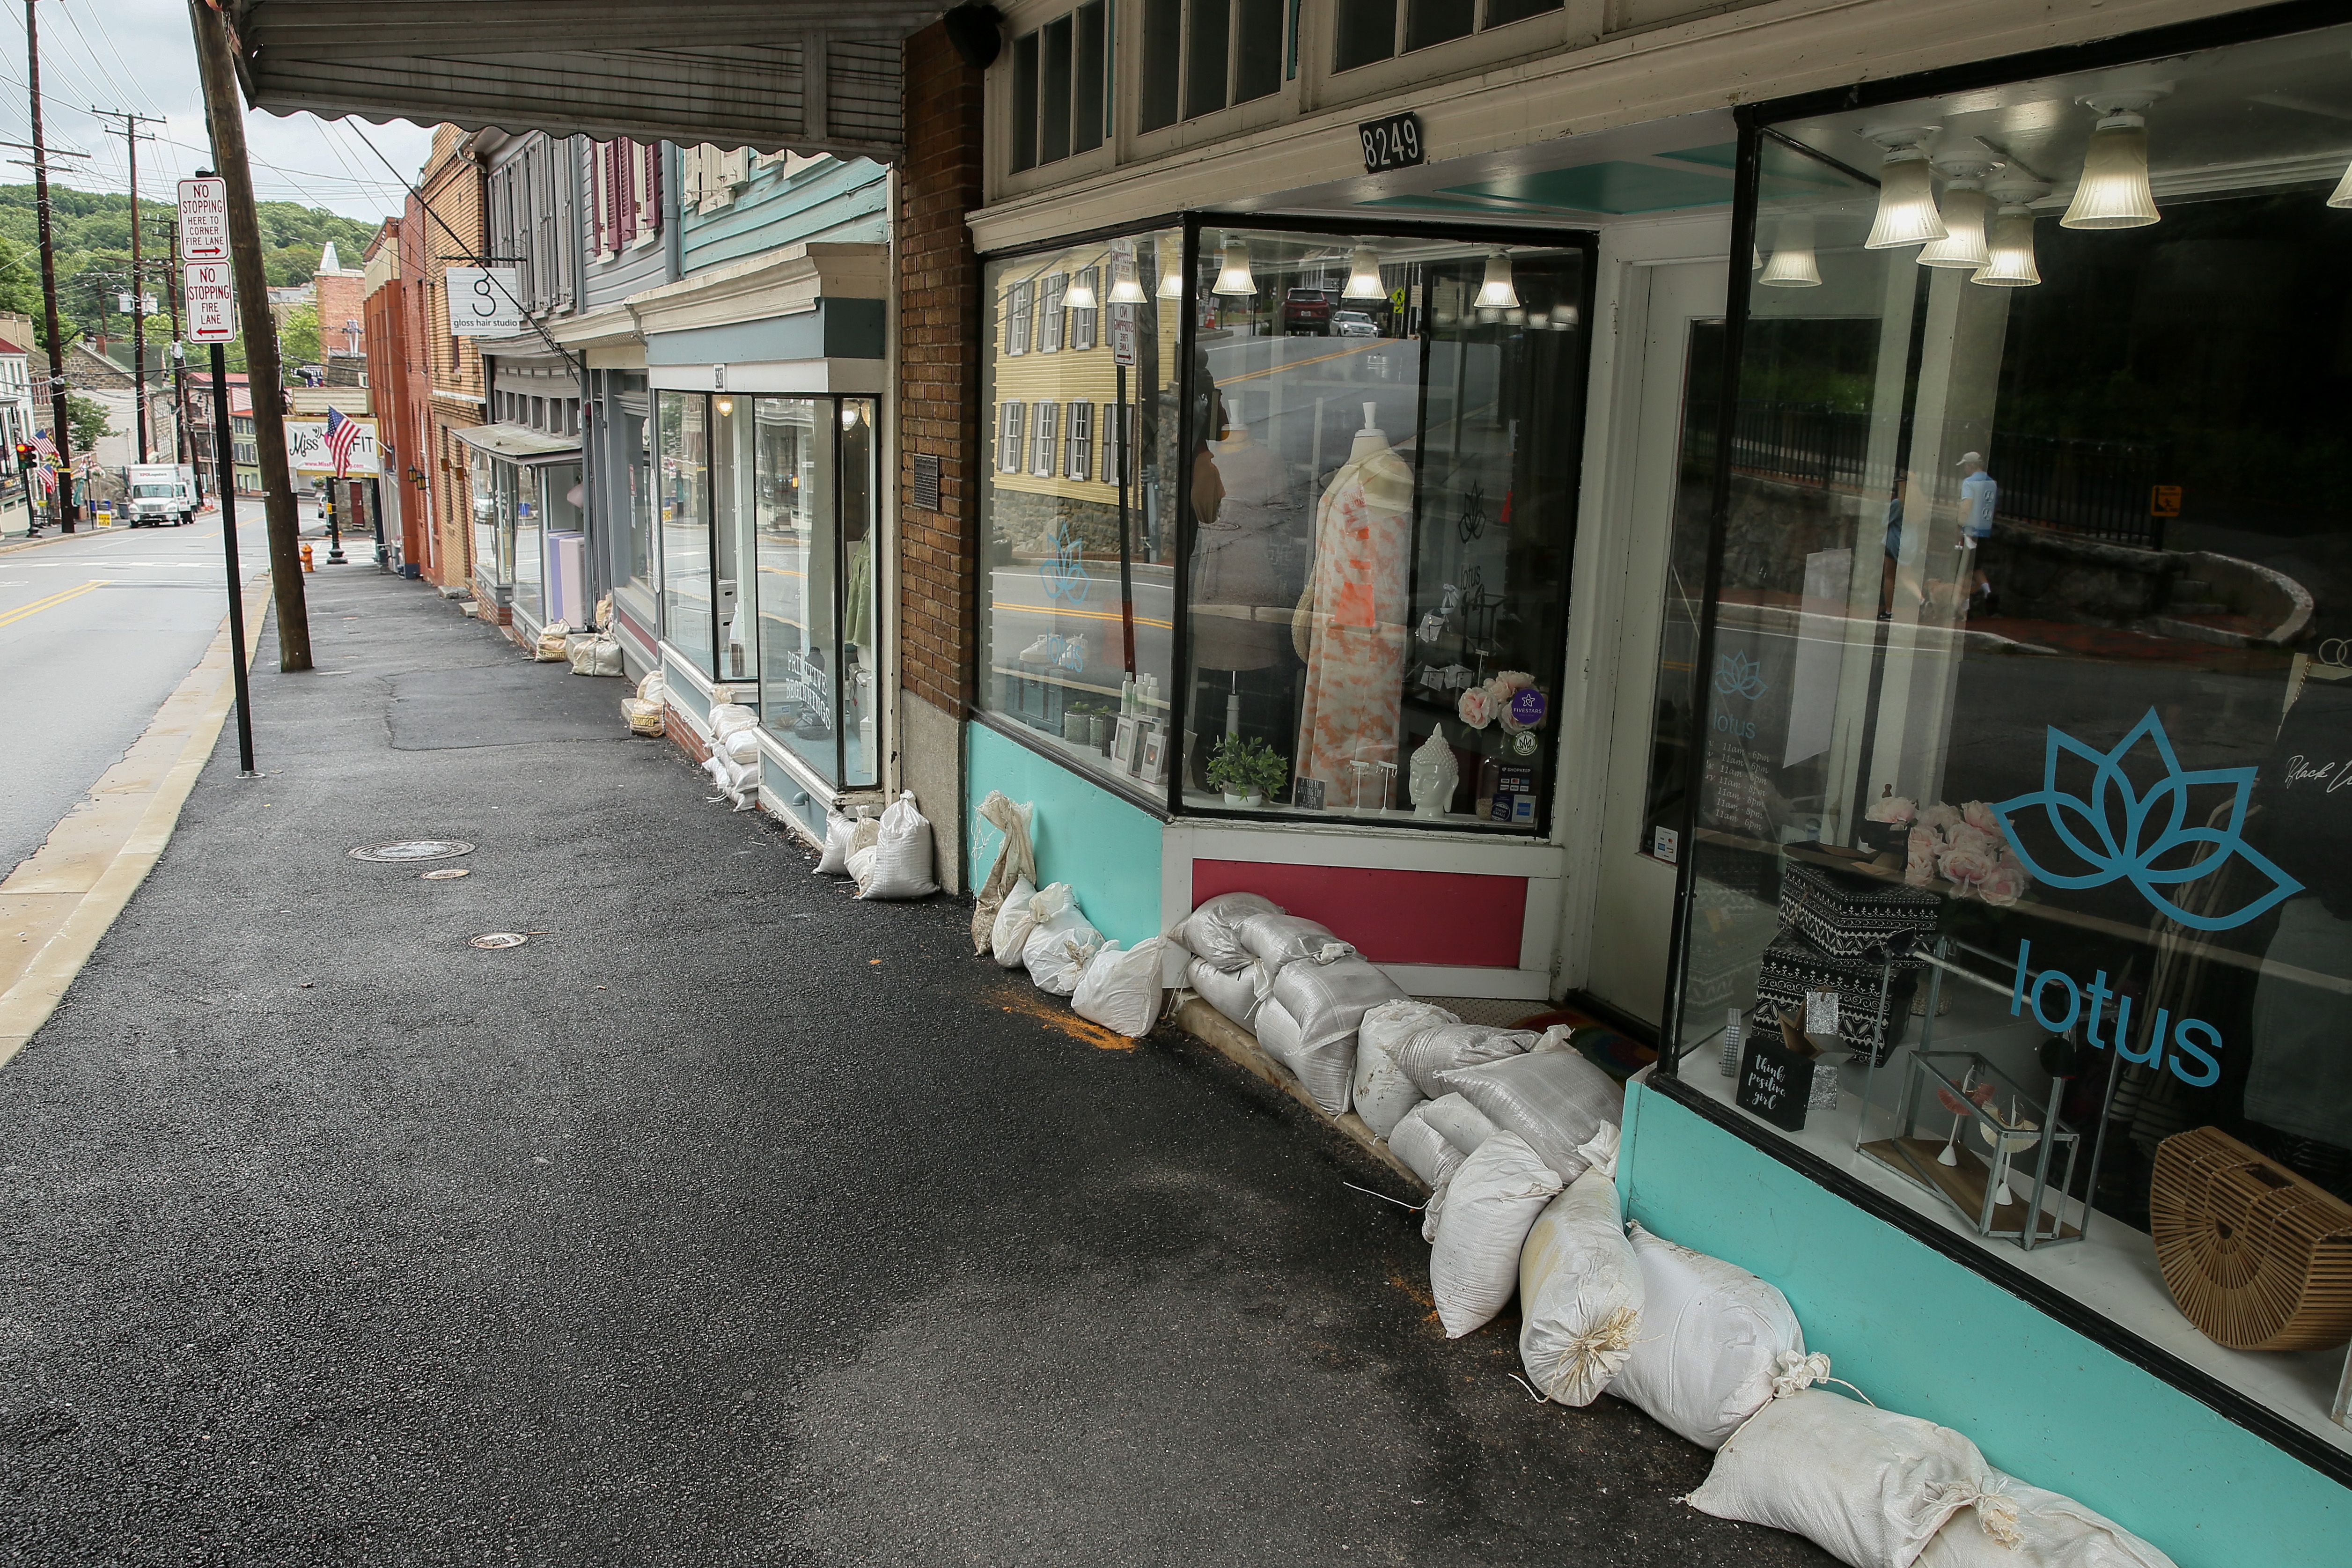 Sandbags are seen in front of local businesses along main Main Street after Tropical Storm Isaias moved through the region on August 04, 2020 in Ellicott City, Maryland. 